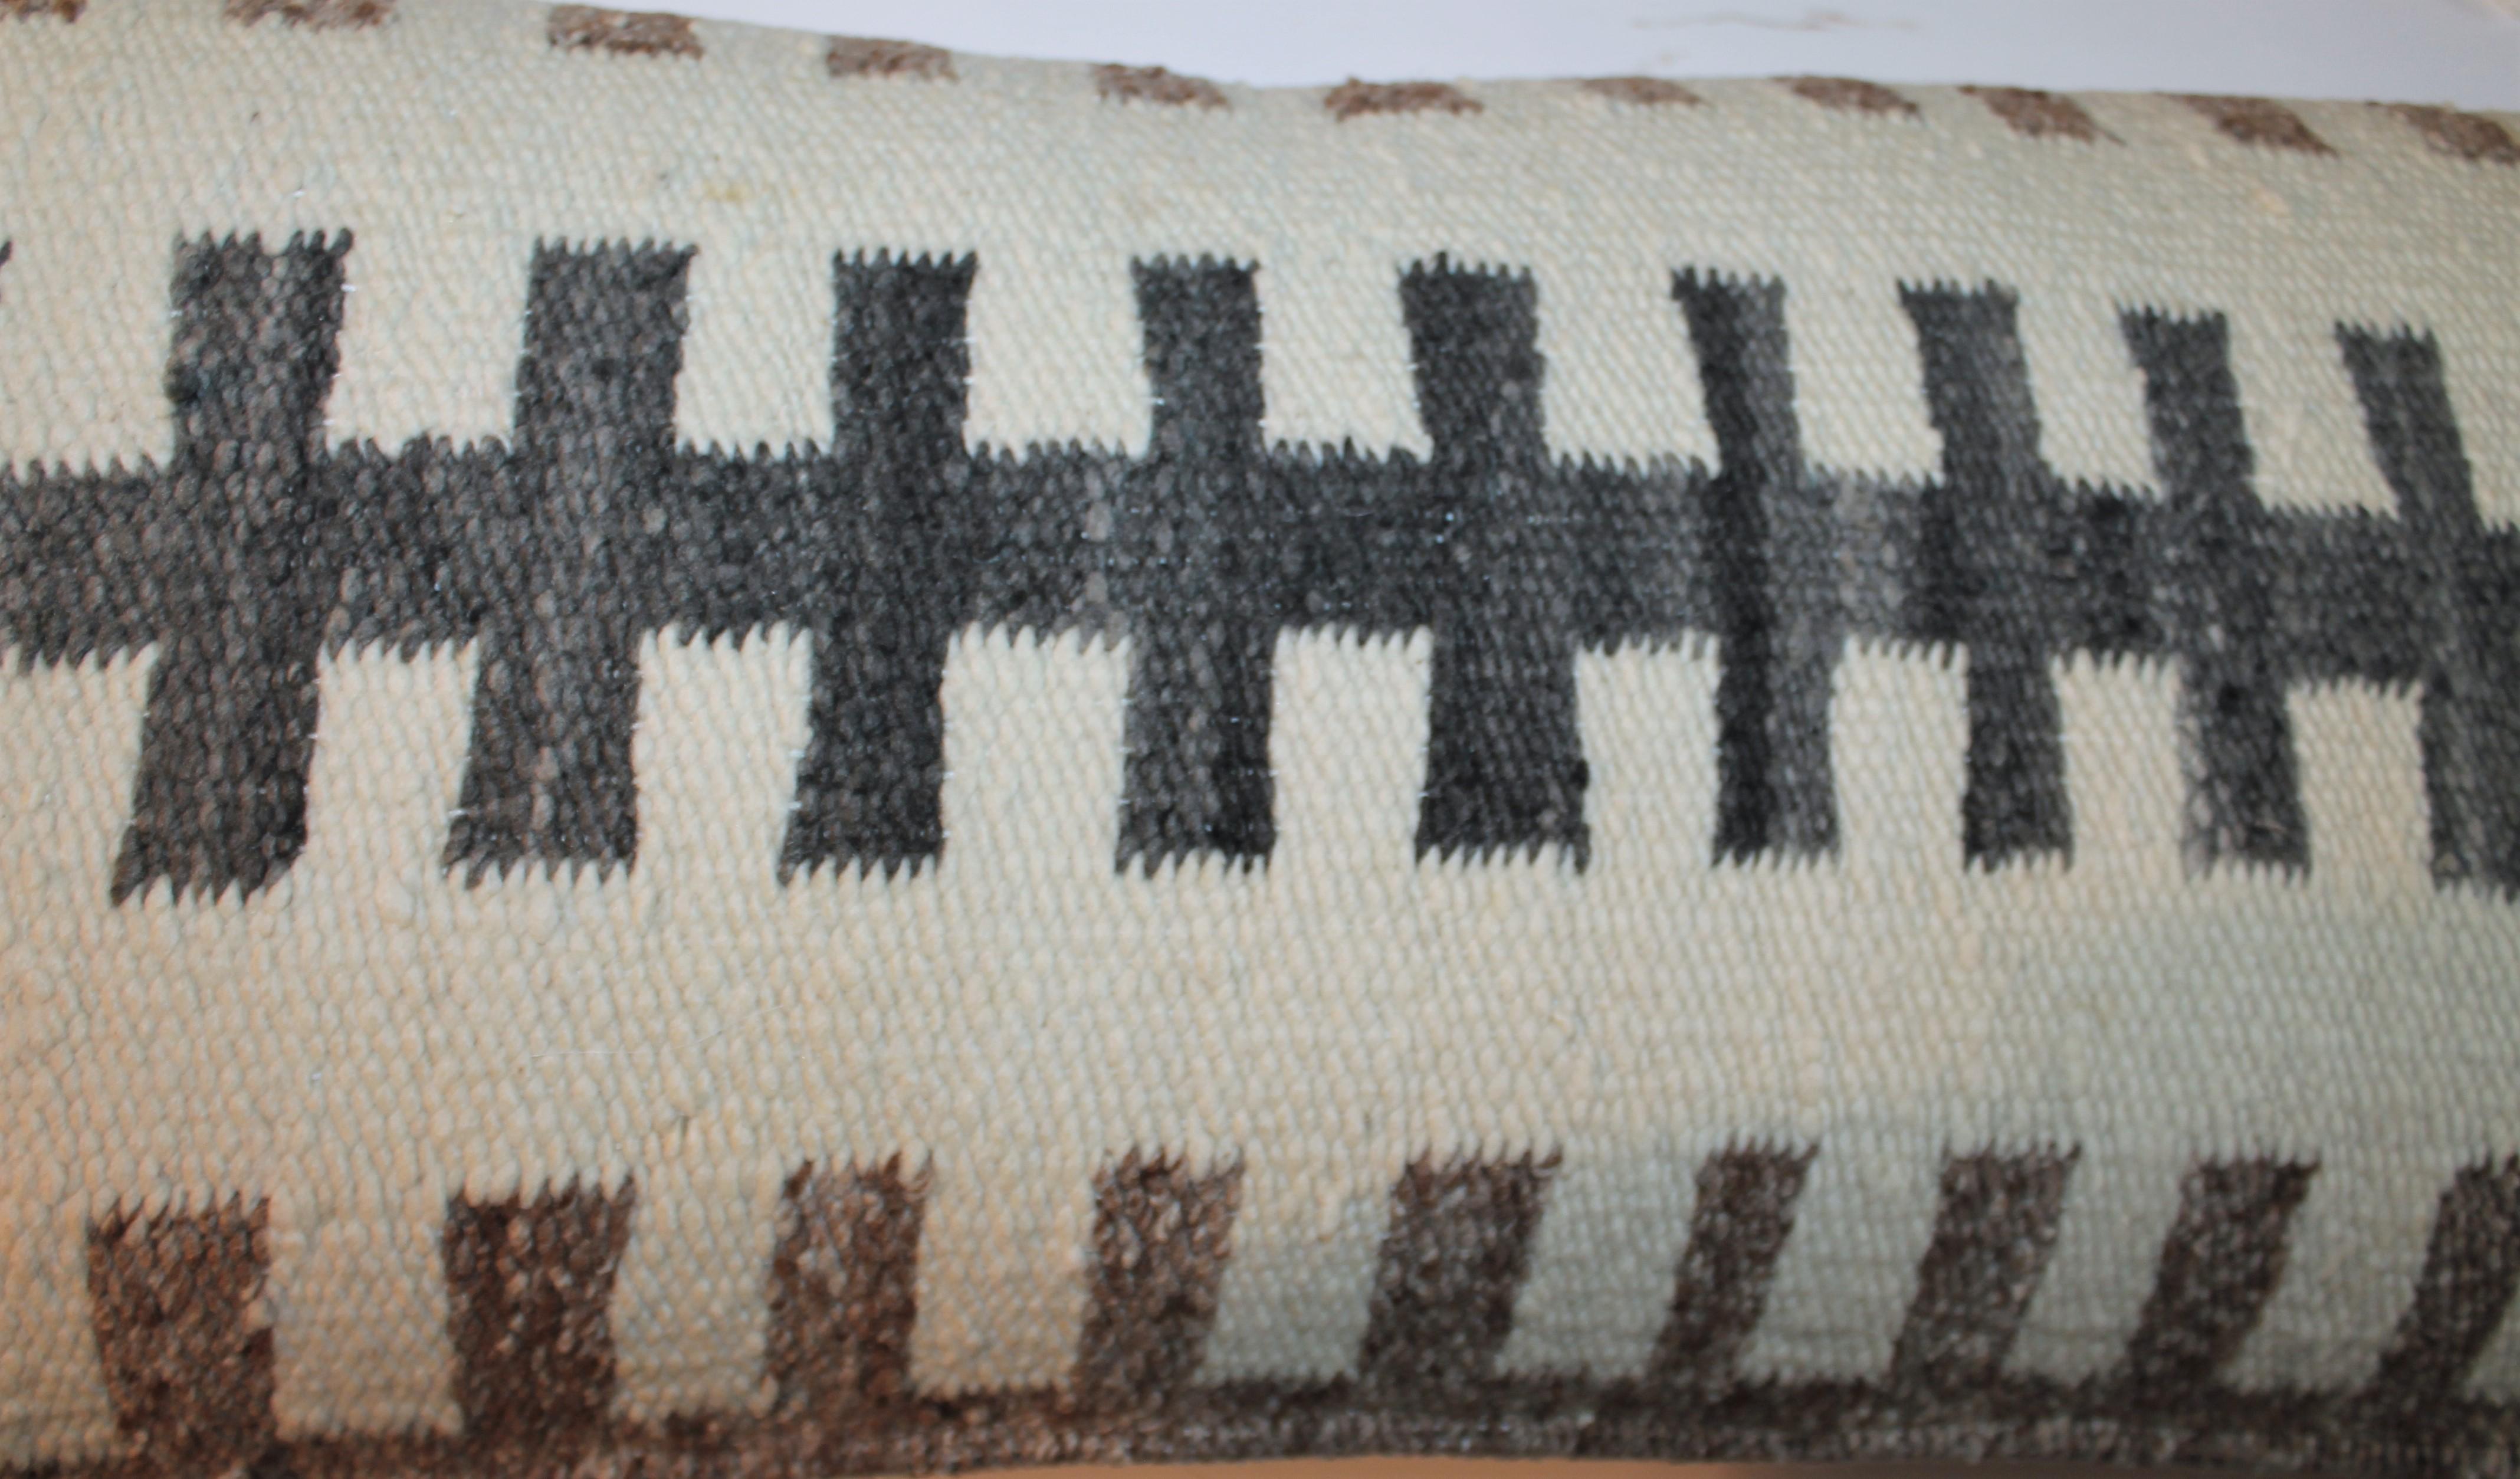 Antique Navajo Indian weaving bolster pillow with pig skin backing. The insert is down and feather fill.